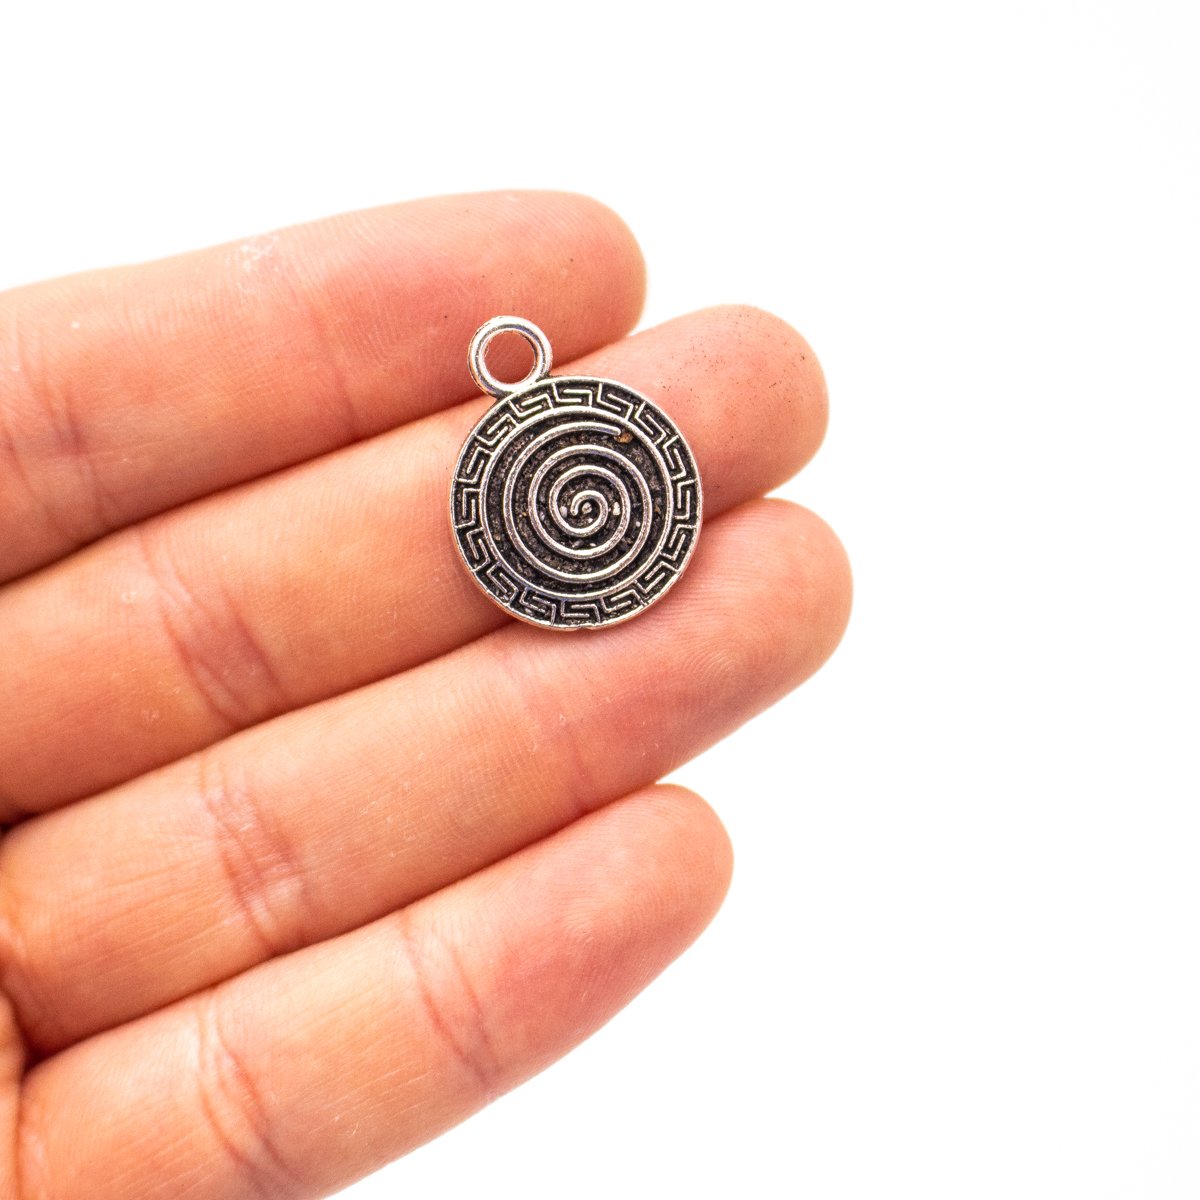 10 units 18x18mm Pendant antique silver Spiral jewelry pendant Jewelry Findings & Components D-3-415